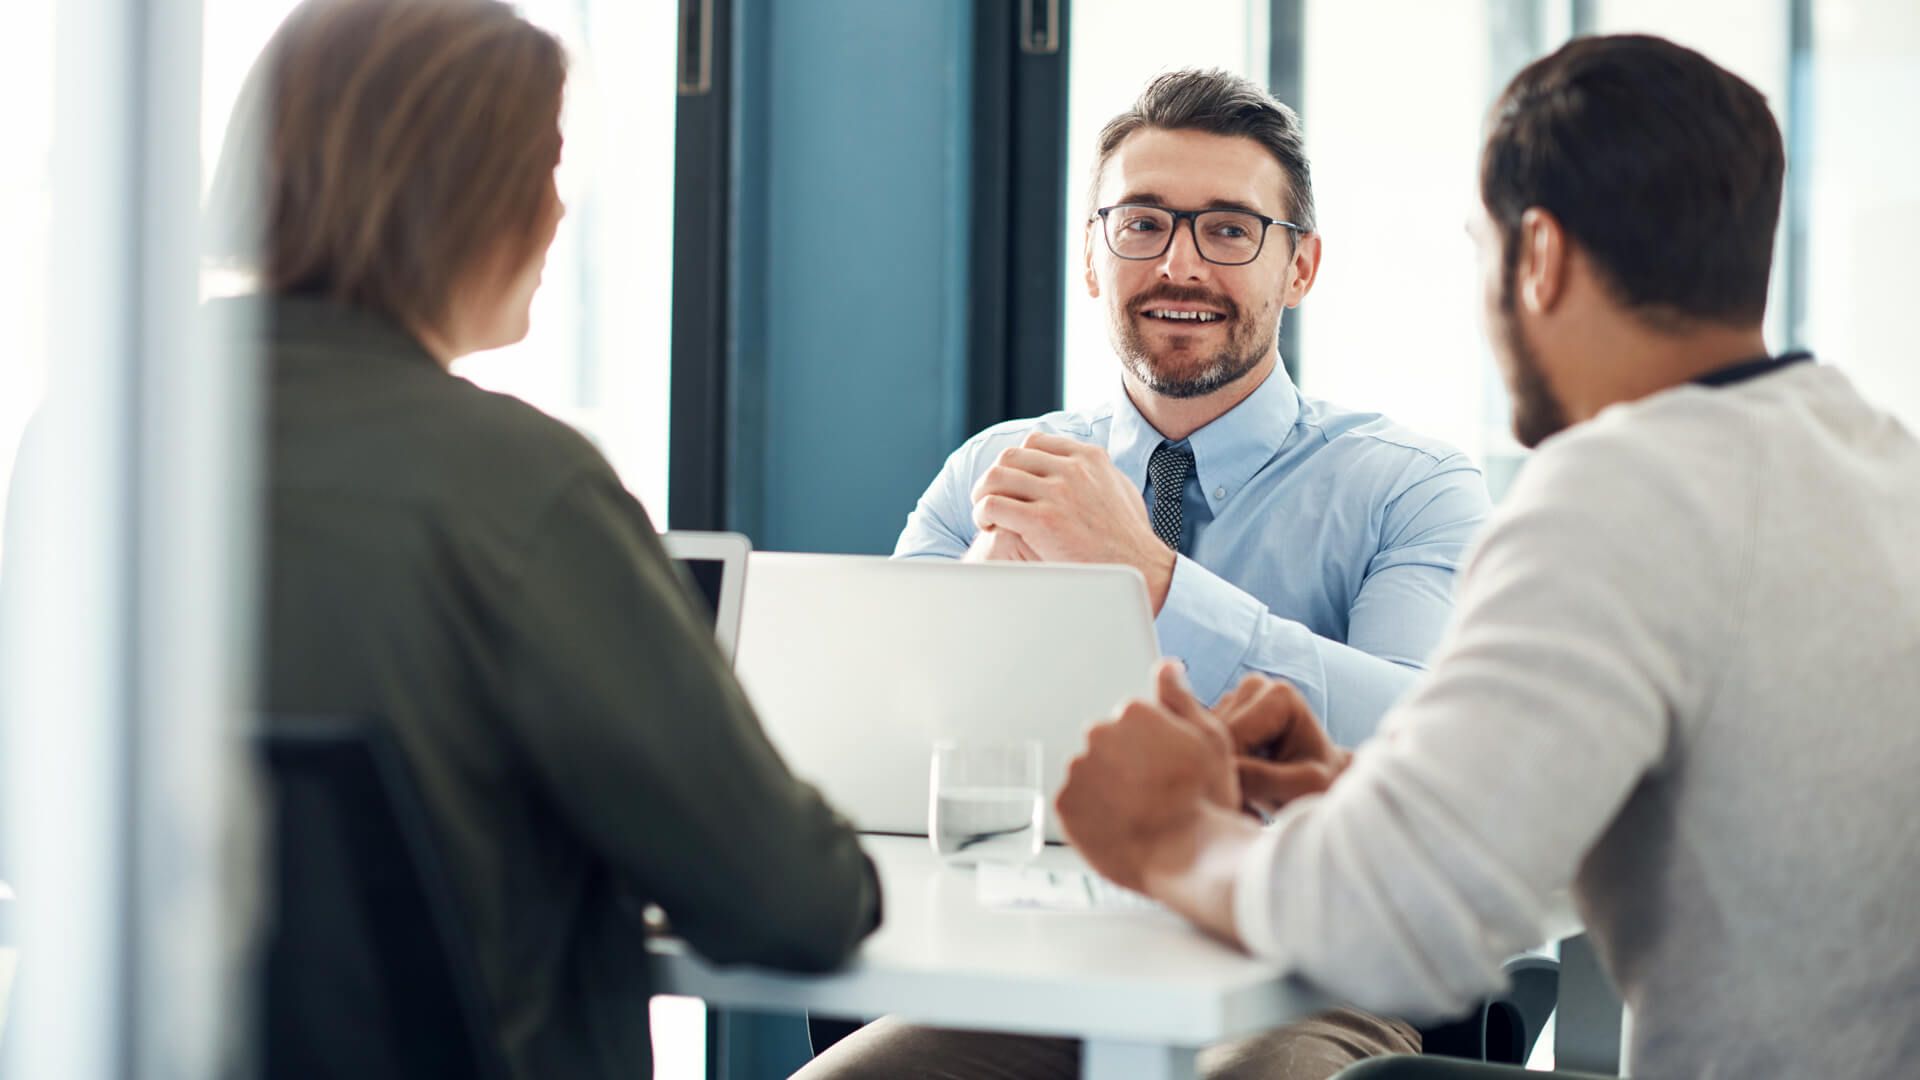 What to Say When Leading a Meeting | GOBankingRates